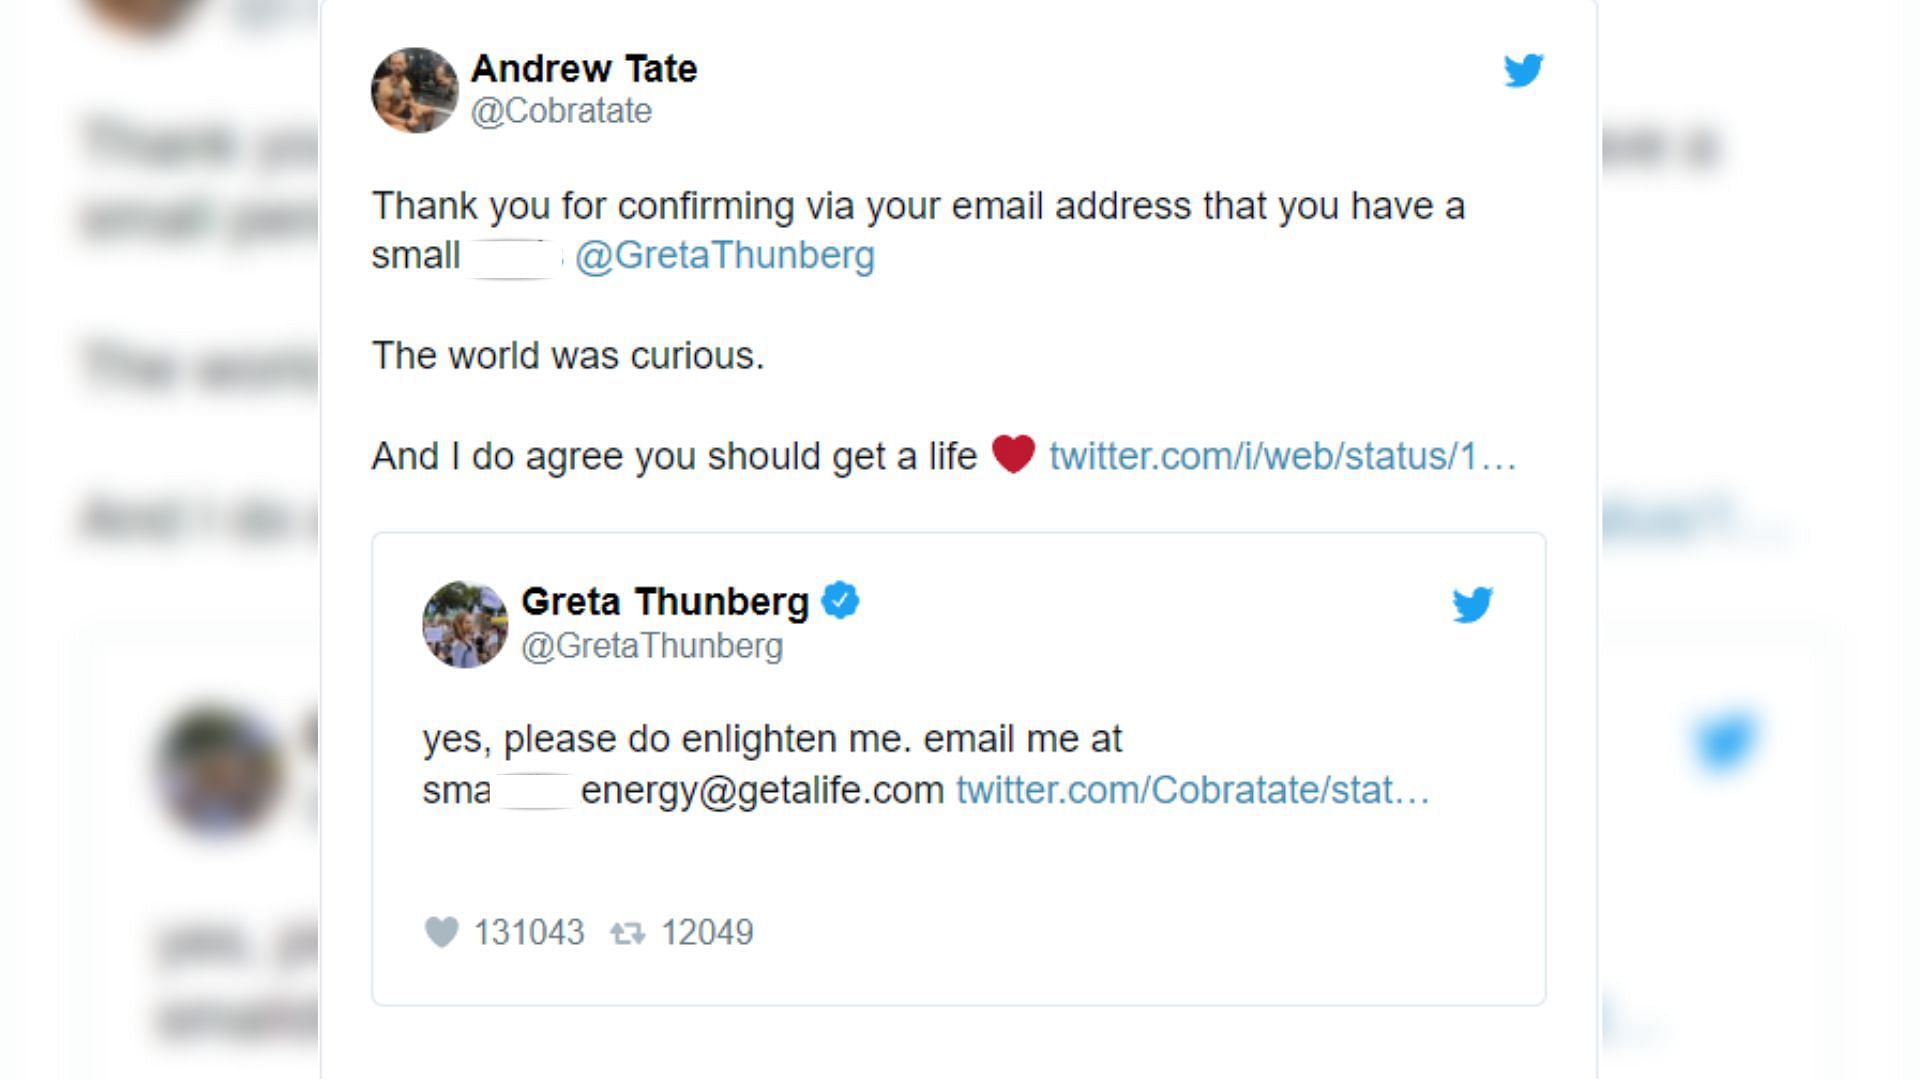 The latest response from Andrew Tate (Image via Twitter)